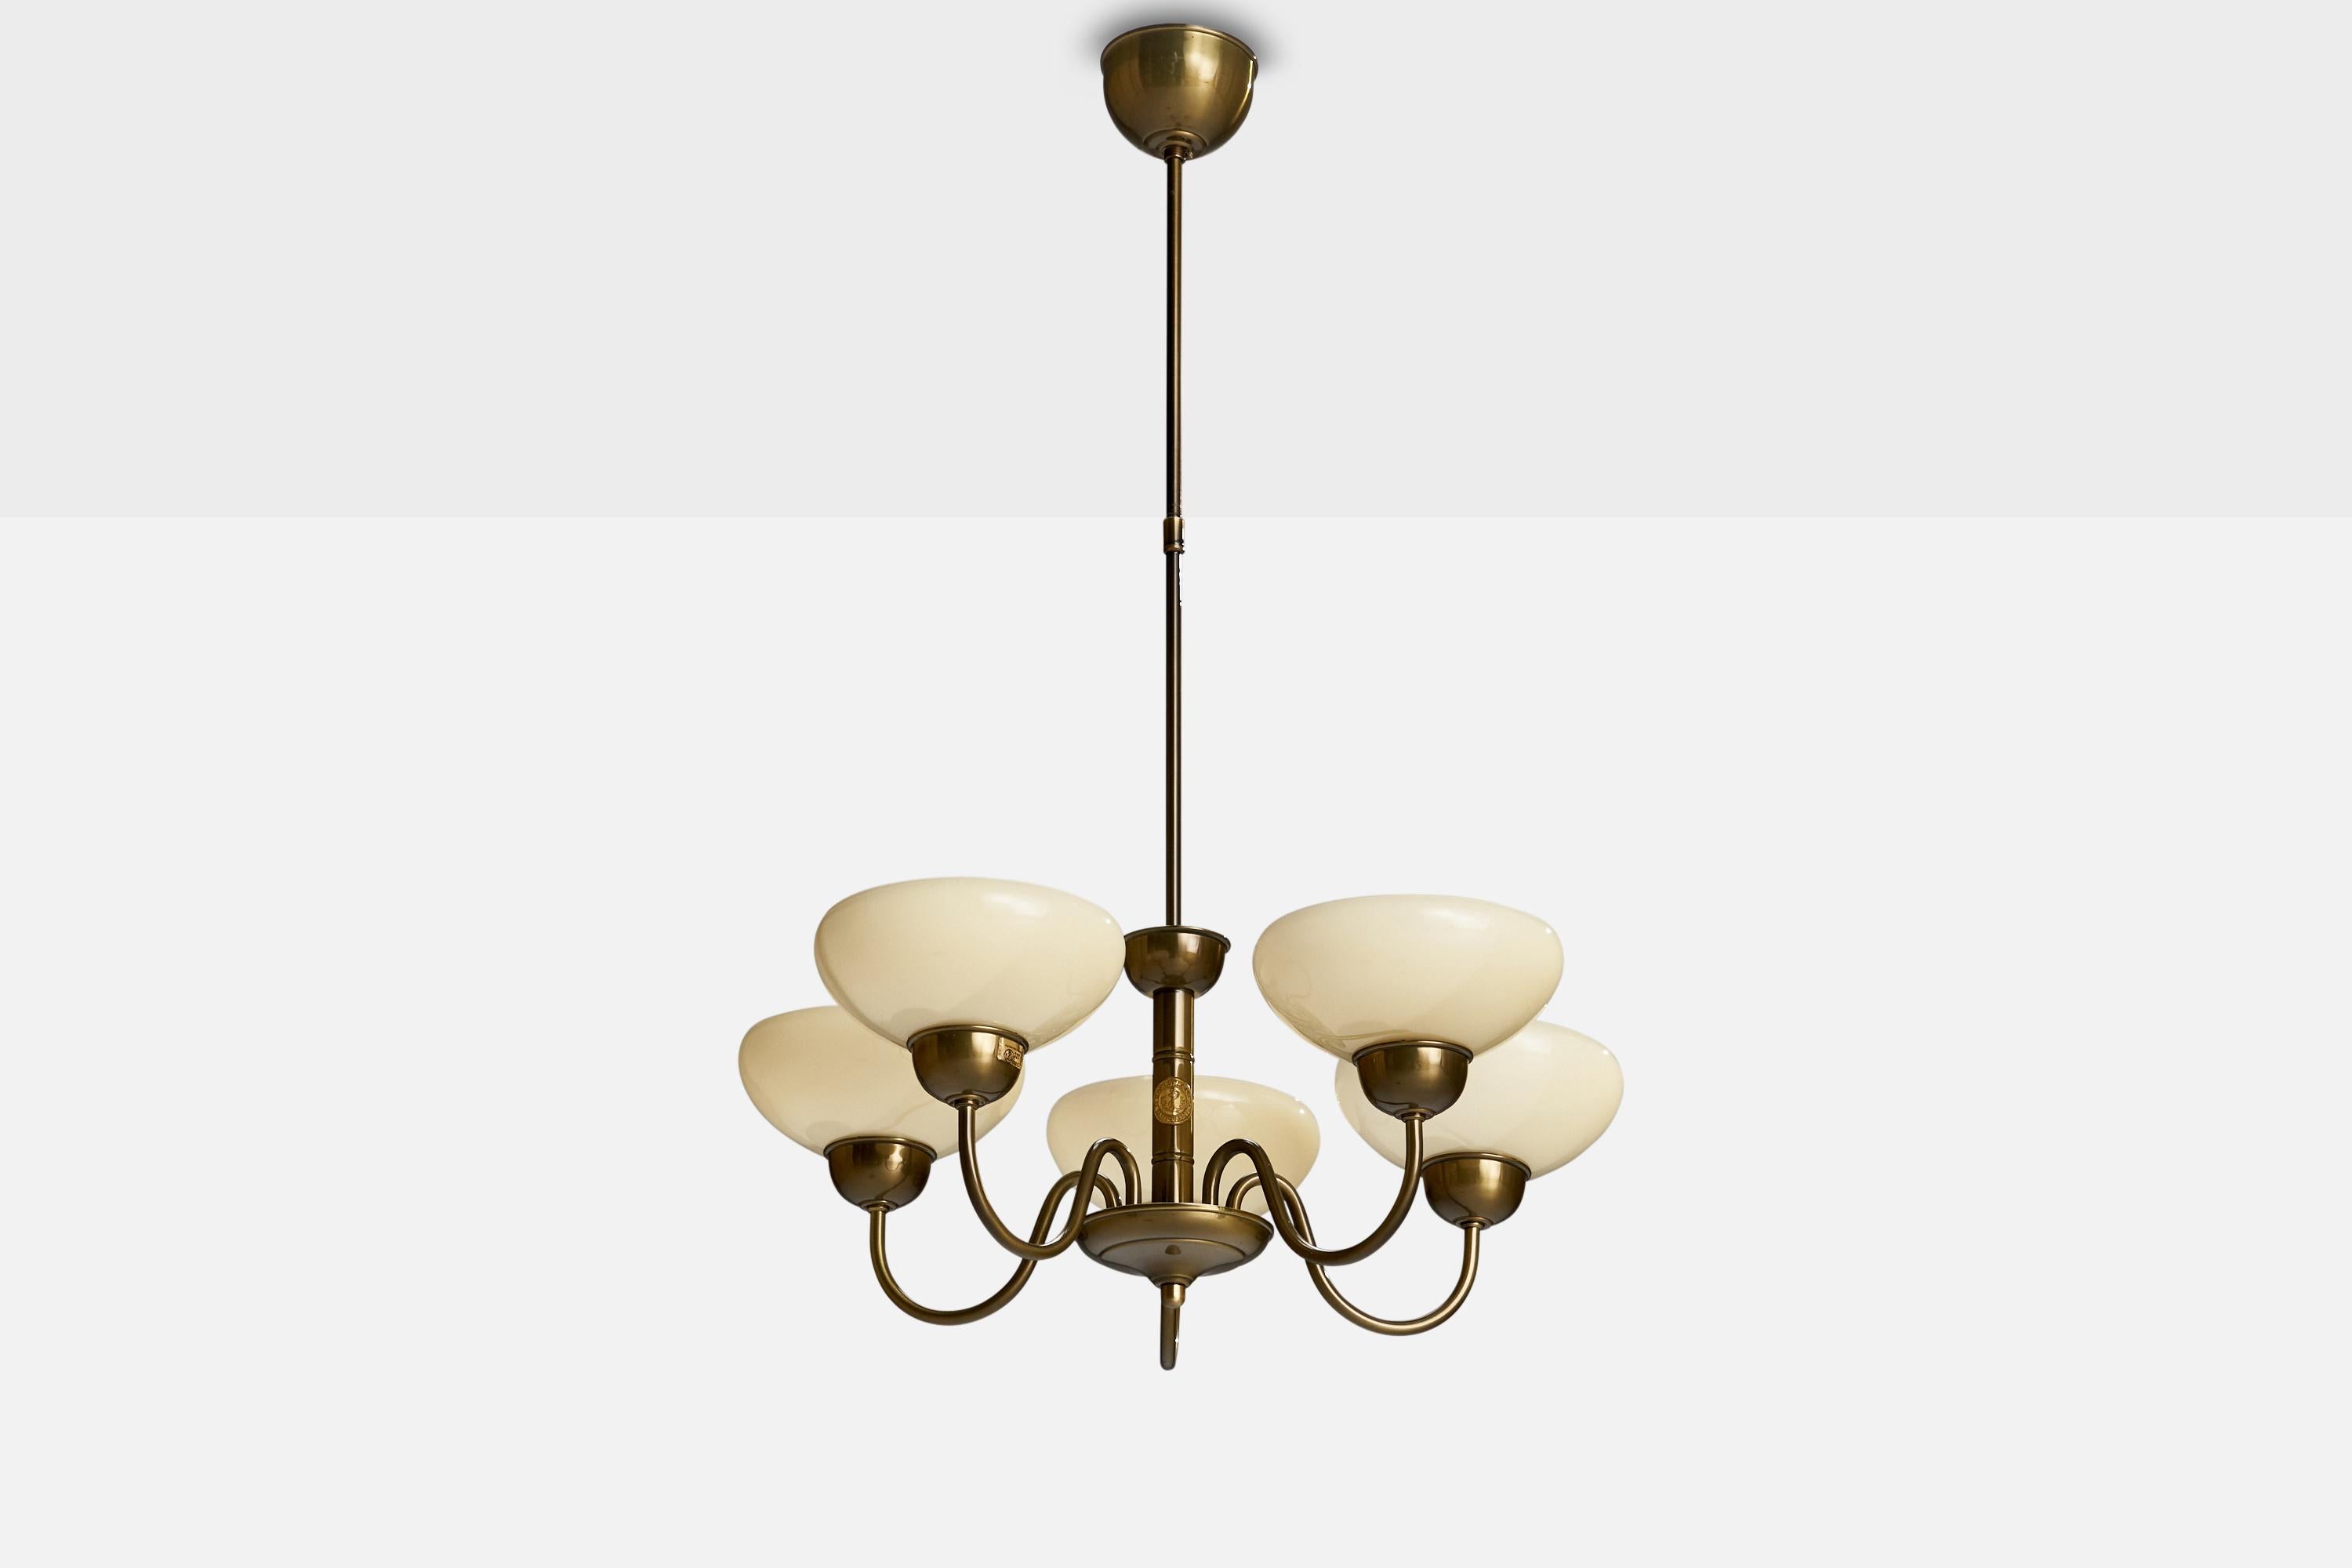 A brass and cream white opaline glass chandelier produced by Karlskrona Lampfabrik, Sweden, c. 1970s.

Dimensions of canopy (inches): 3.07” H x 4.19” Diameter
Socket takes standard E-26 bulbs. 5 socket.There is no maximum wattage stated on the